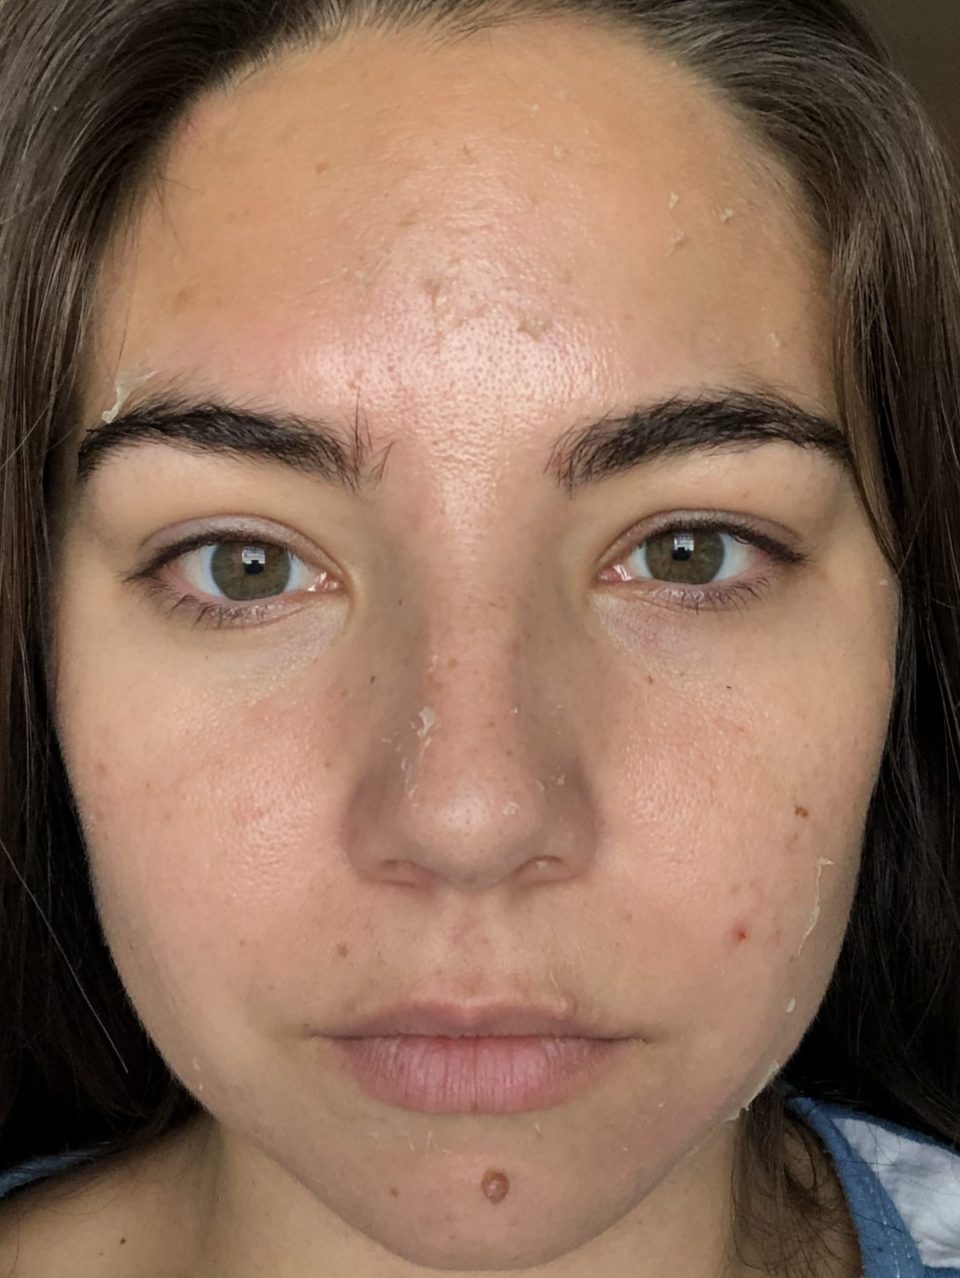 Jessner Chemical Peel Beforeafter Photos Of The Proven Facial Lauryncakes 0595